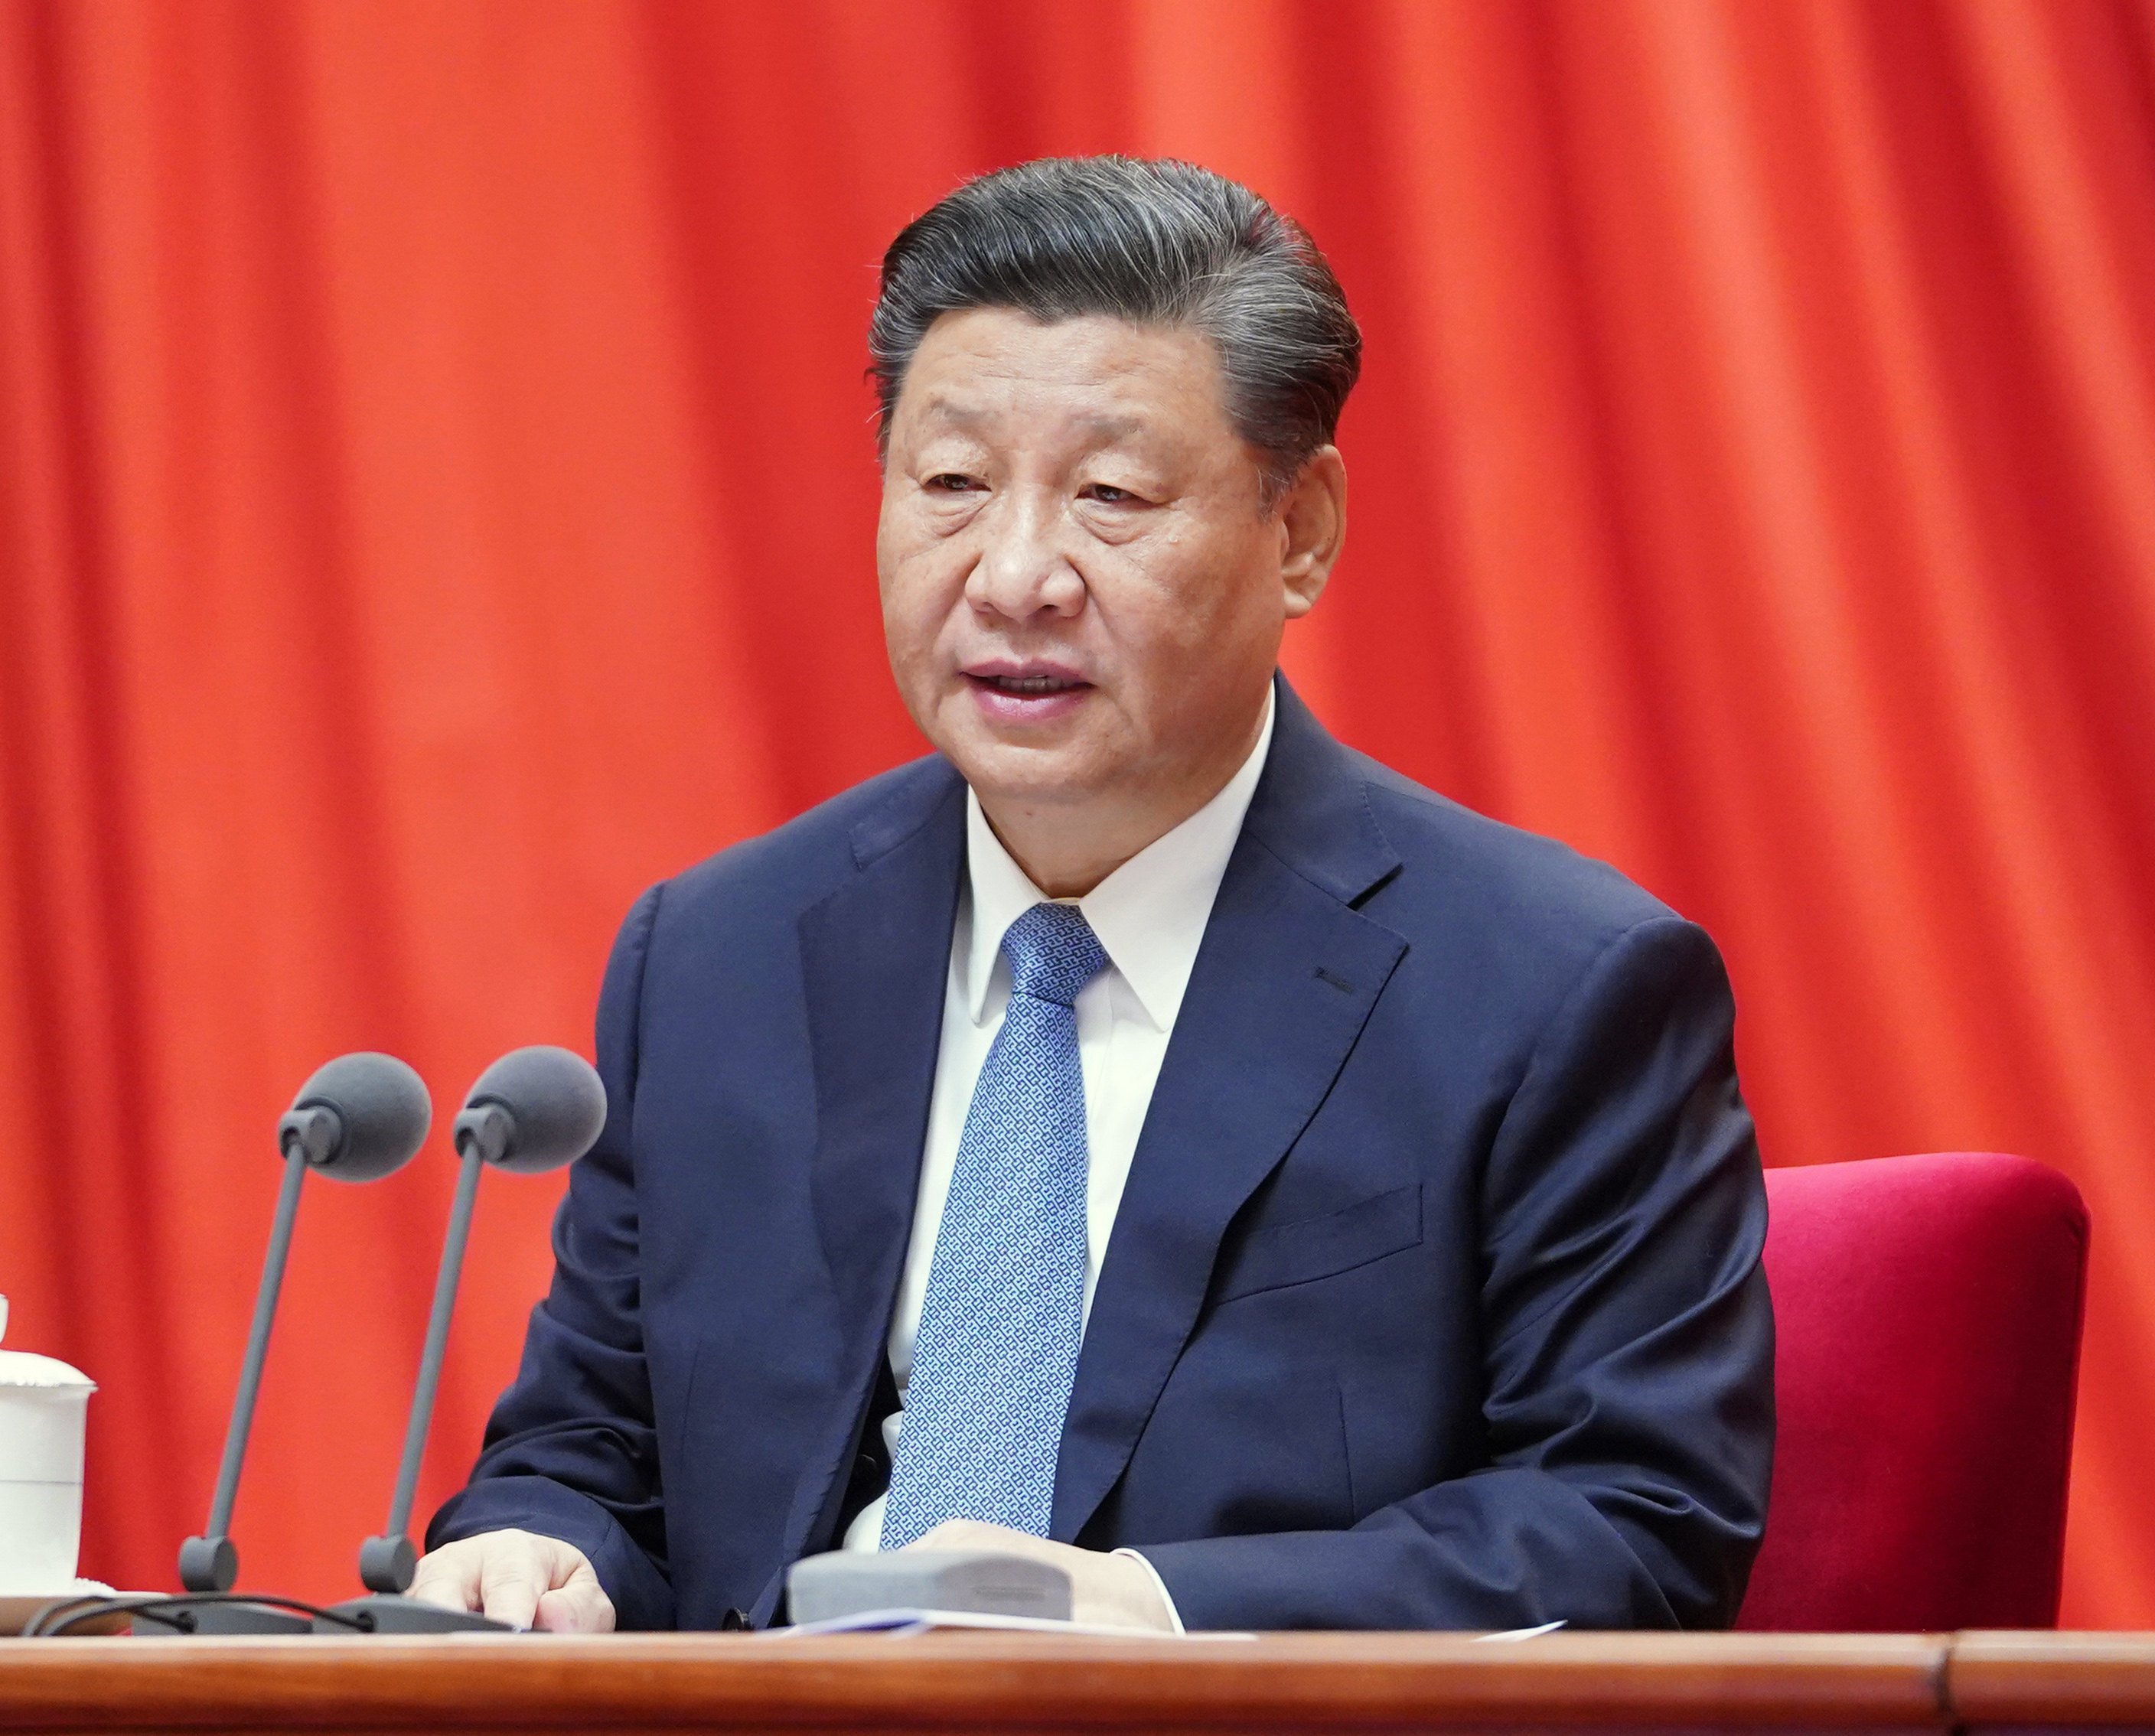 Chinese President Xi Jinping addresses a meeting of the Communist Party’s Central Commission for Discipline Inspection in Beijing last year. Photo: Xinhua